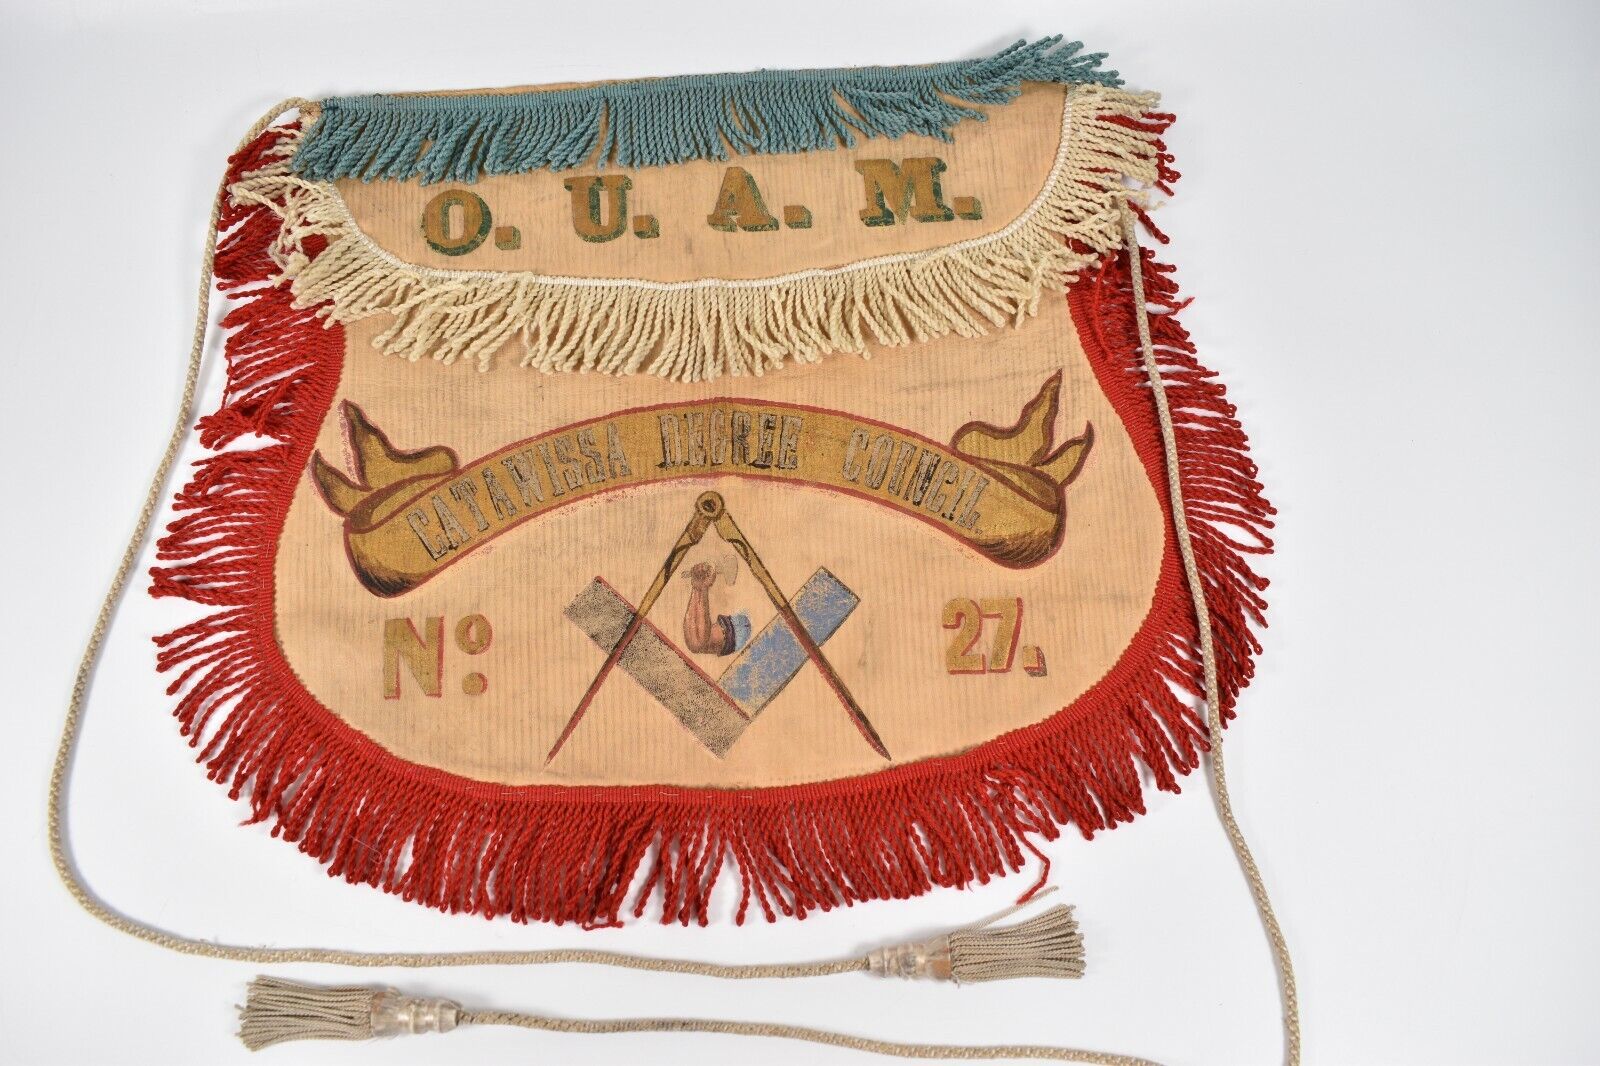 Antique Leather O.U.A.M Ceremonial  Apron Painted Catawissa No. 27 Chas Shuman